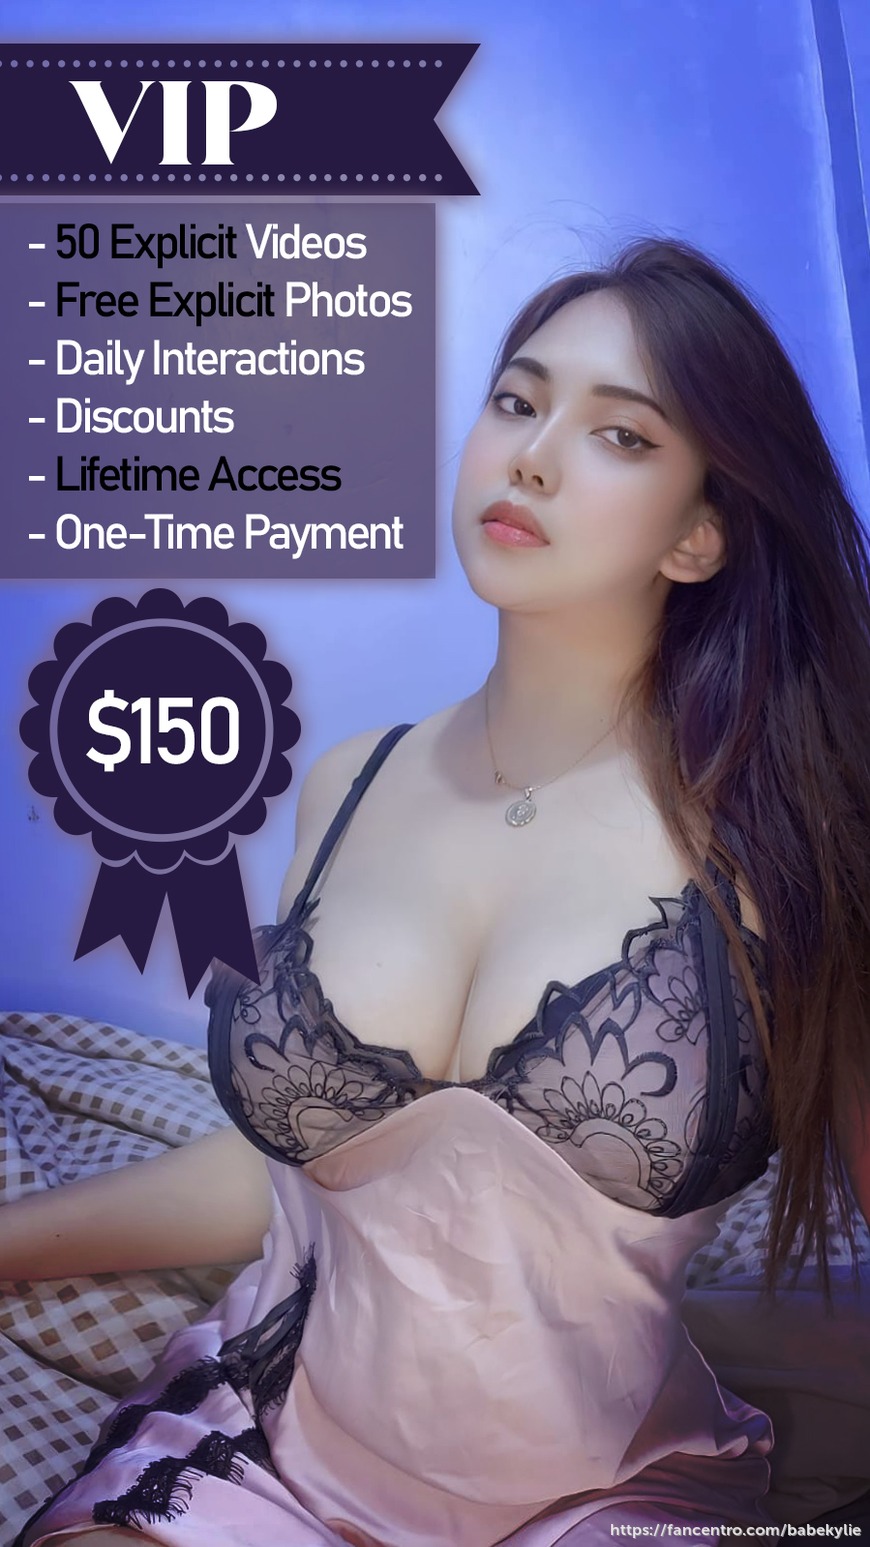 I just wanted to remind you how amazing my VIP plan is going to be. With 50 explicit videos, daily interactions, free photos and discounts on future purchases - we're both in for a wild ride!